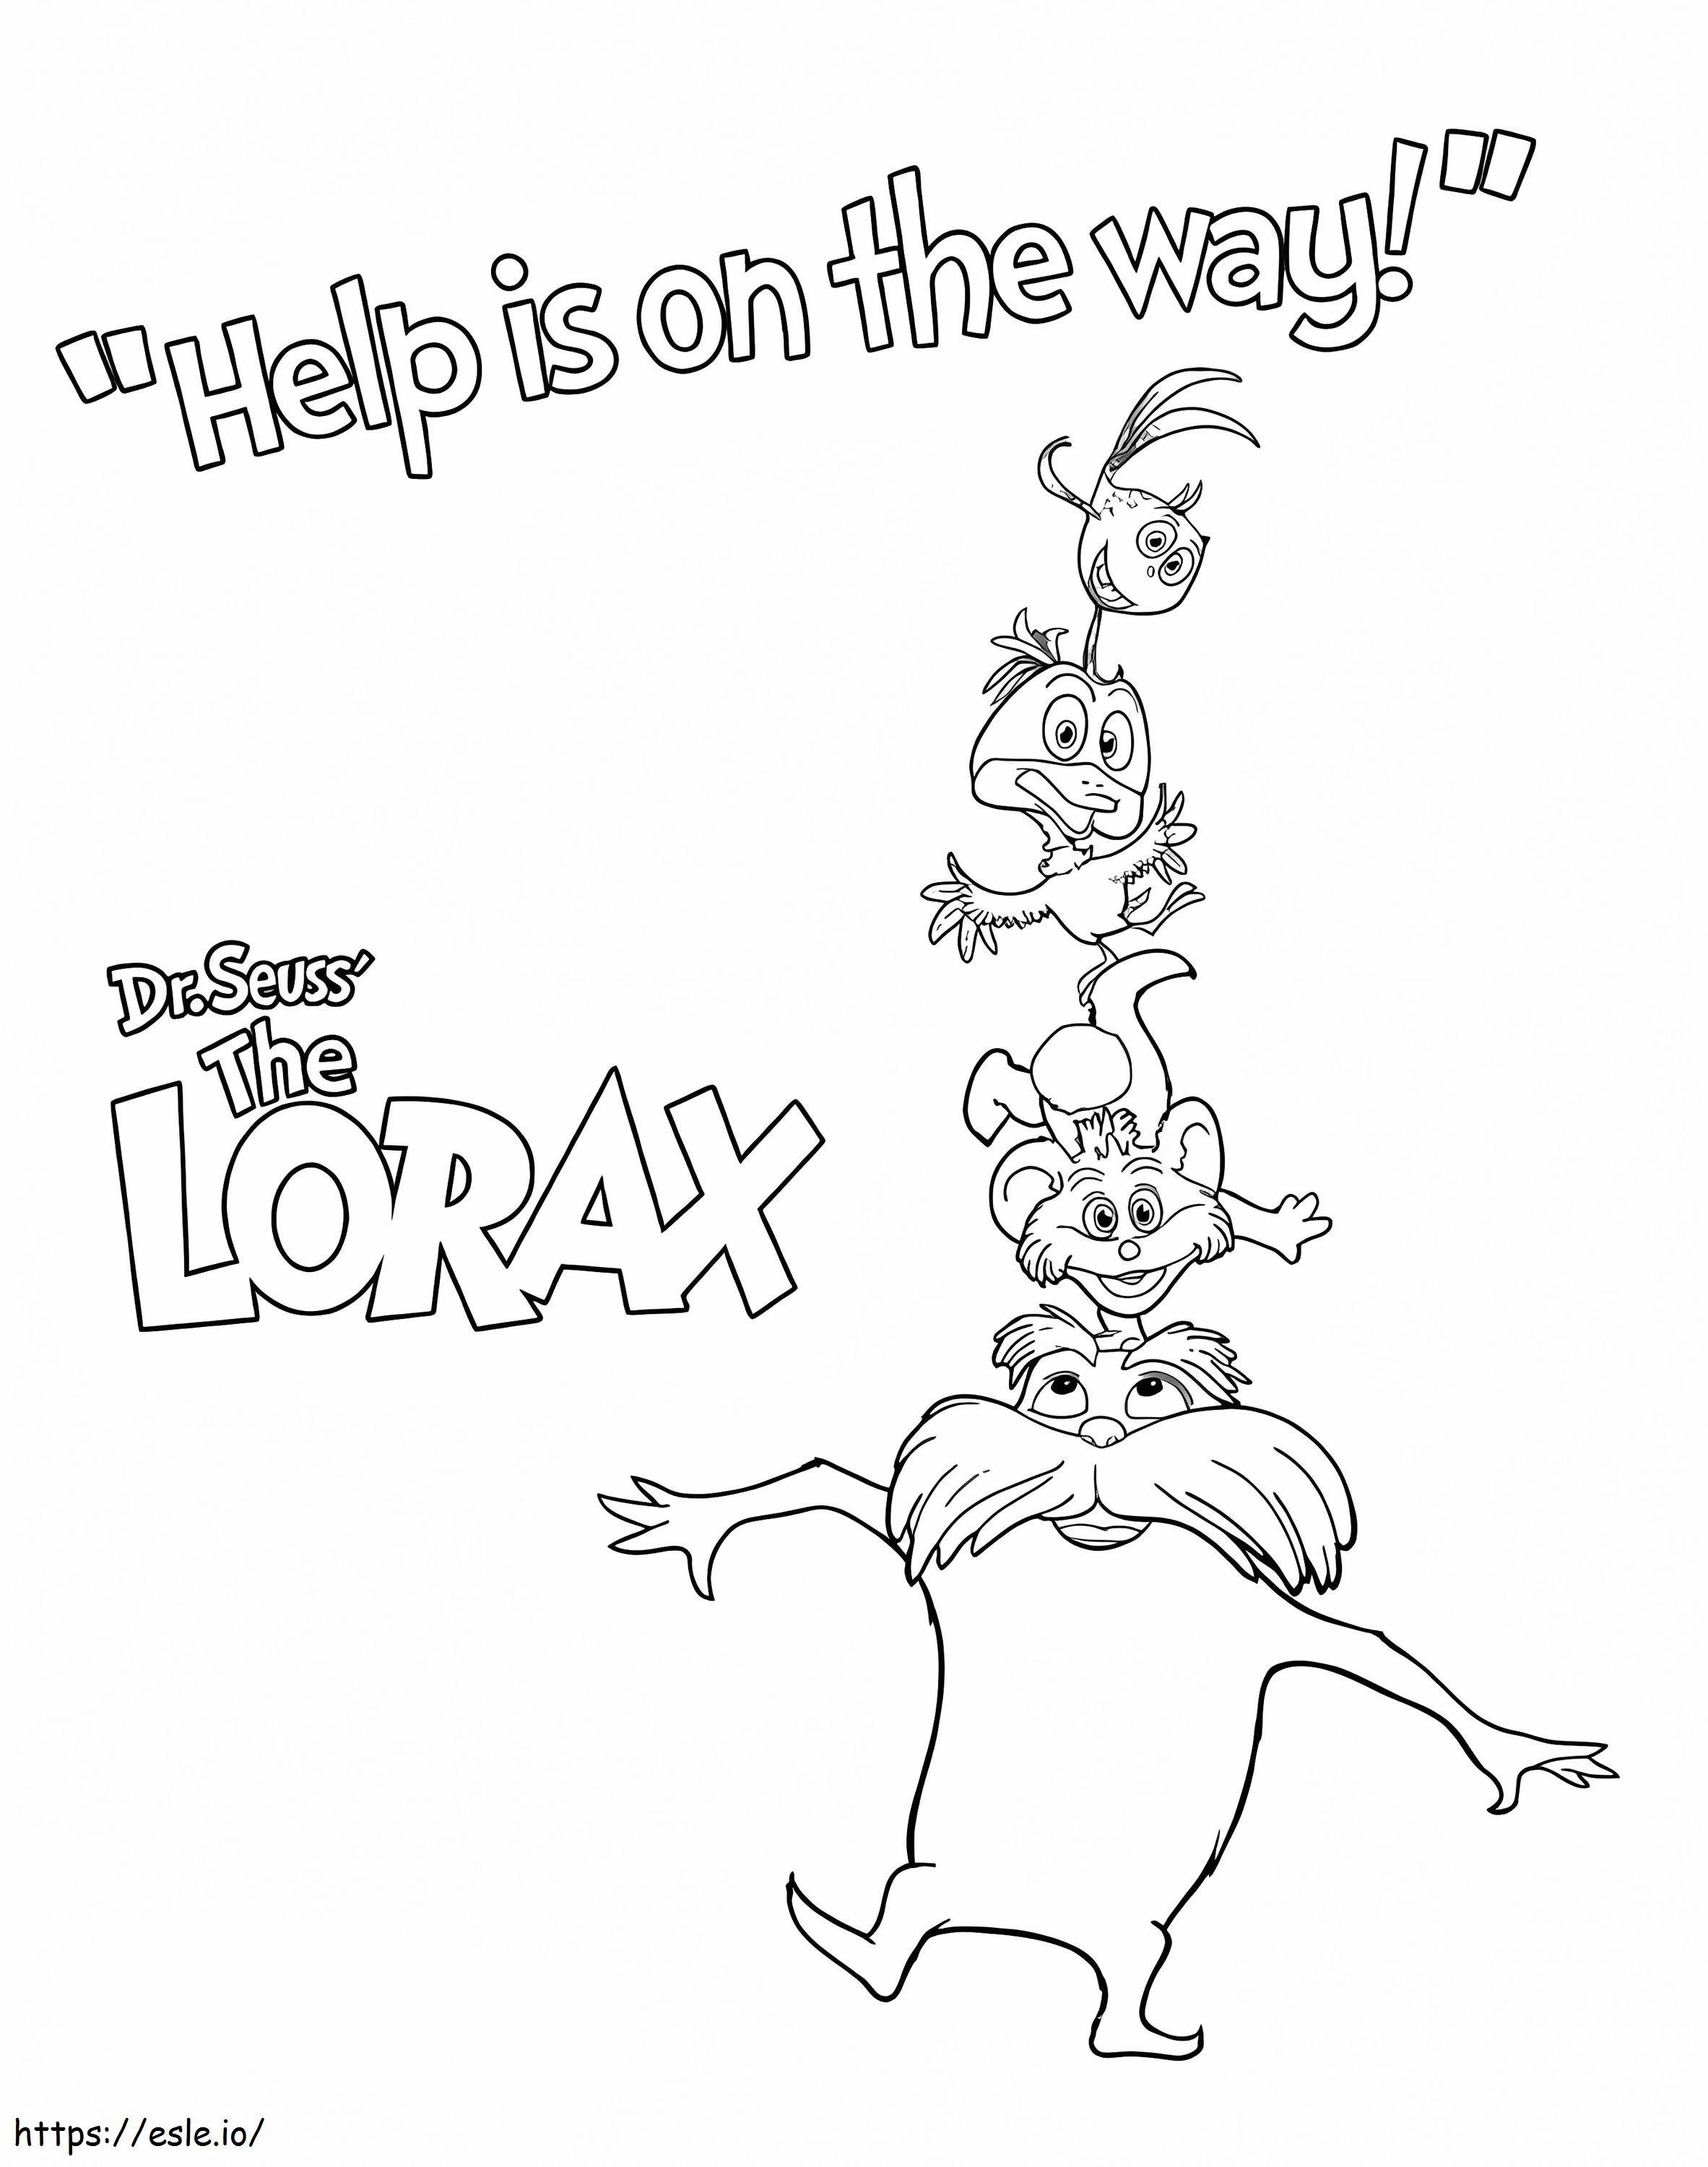 Characters From The Lorax coloring page